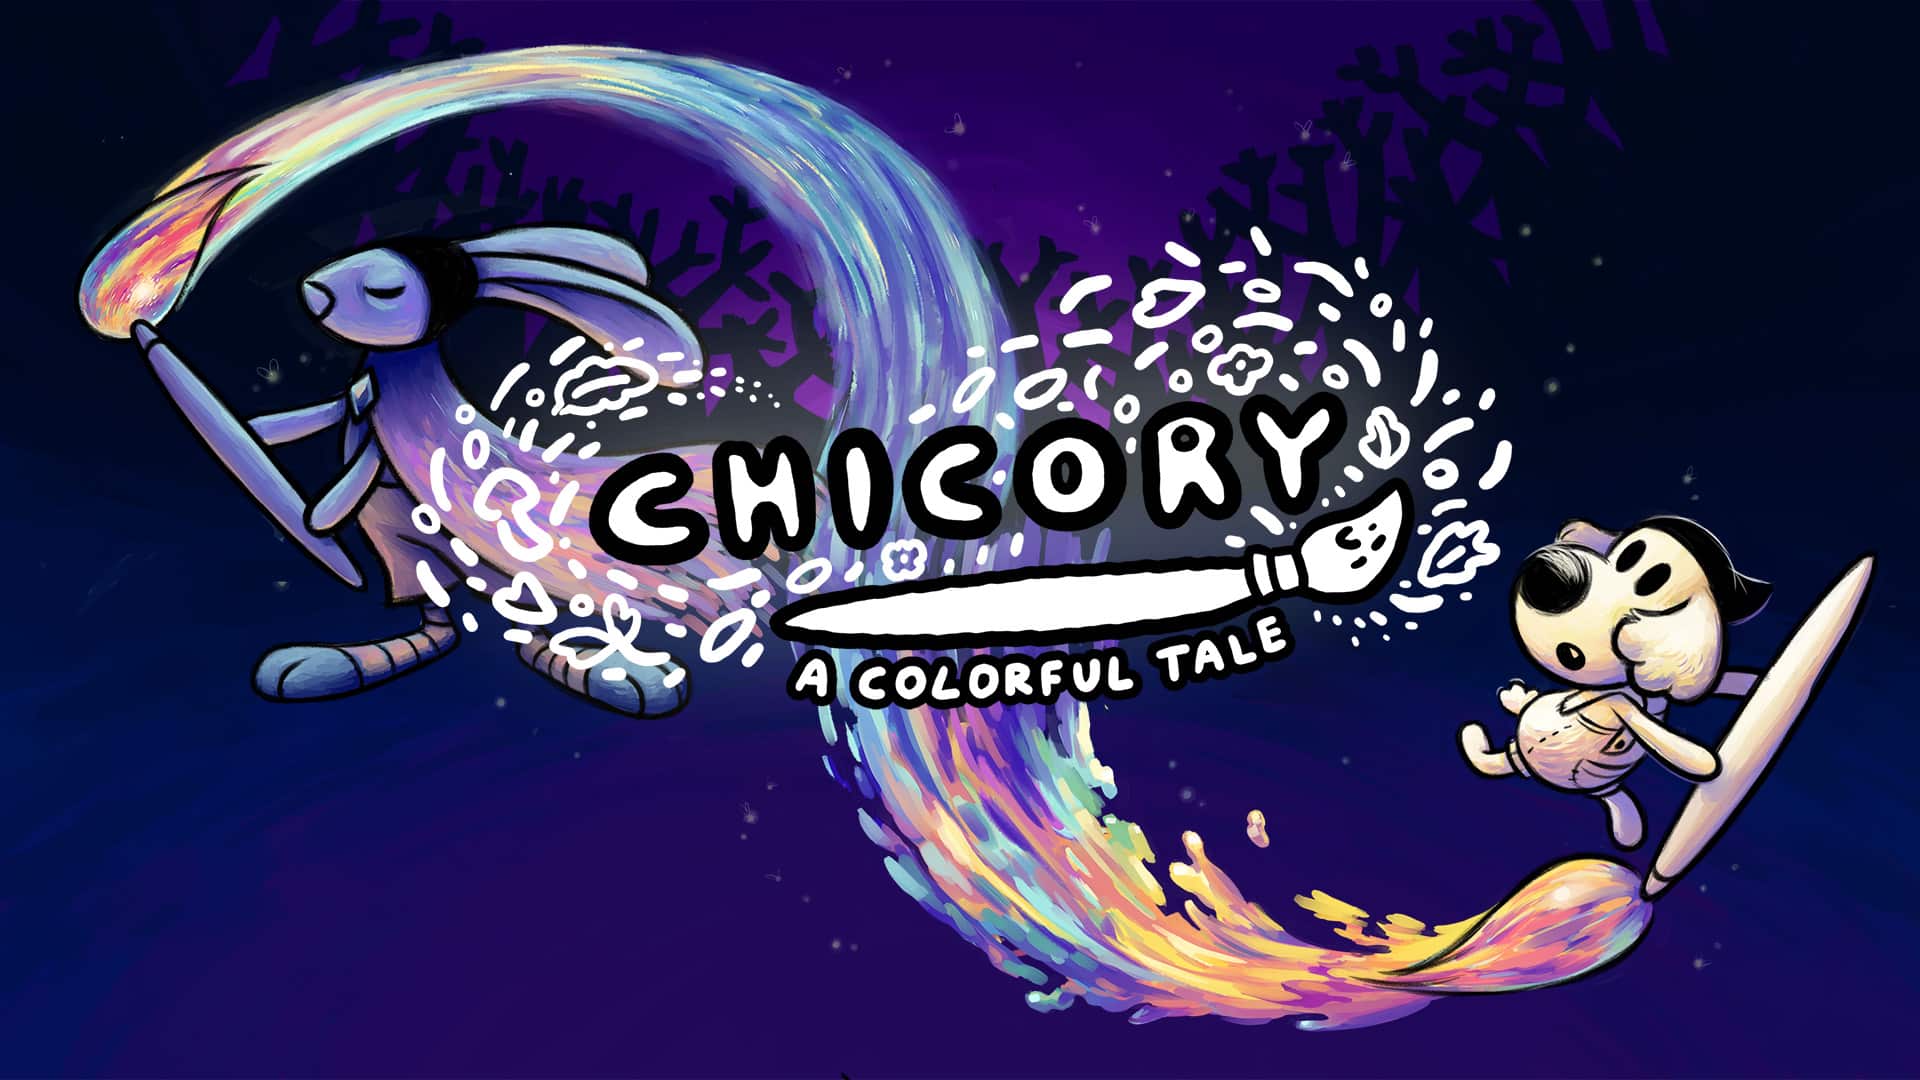 chicory a colorful tale logo